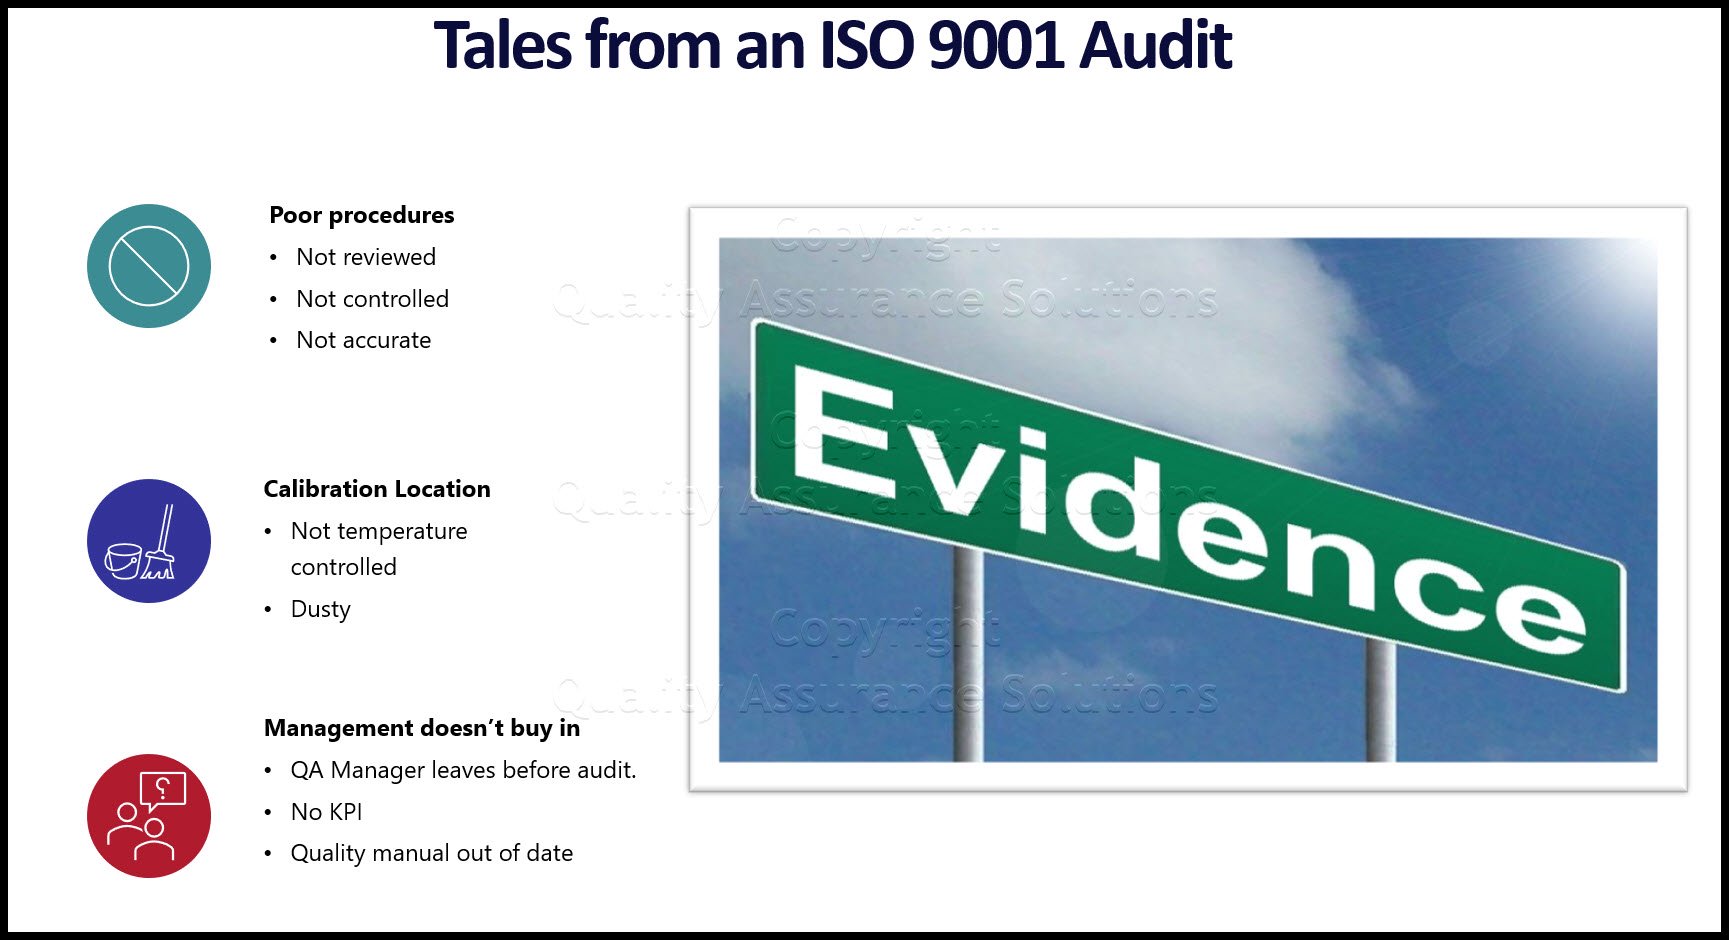 Review and Contribute your ISO 9001 Survival Stories. Teach others on ISO Audit pitfalls and tne ISO 9001 definition.